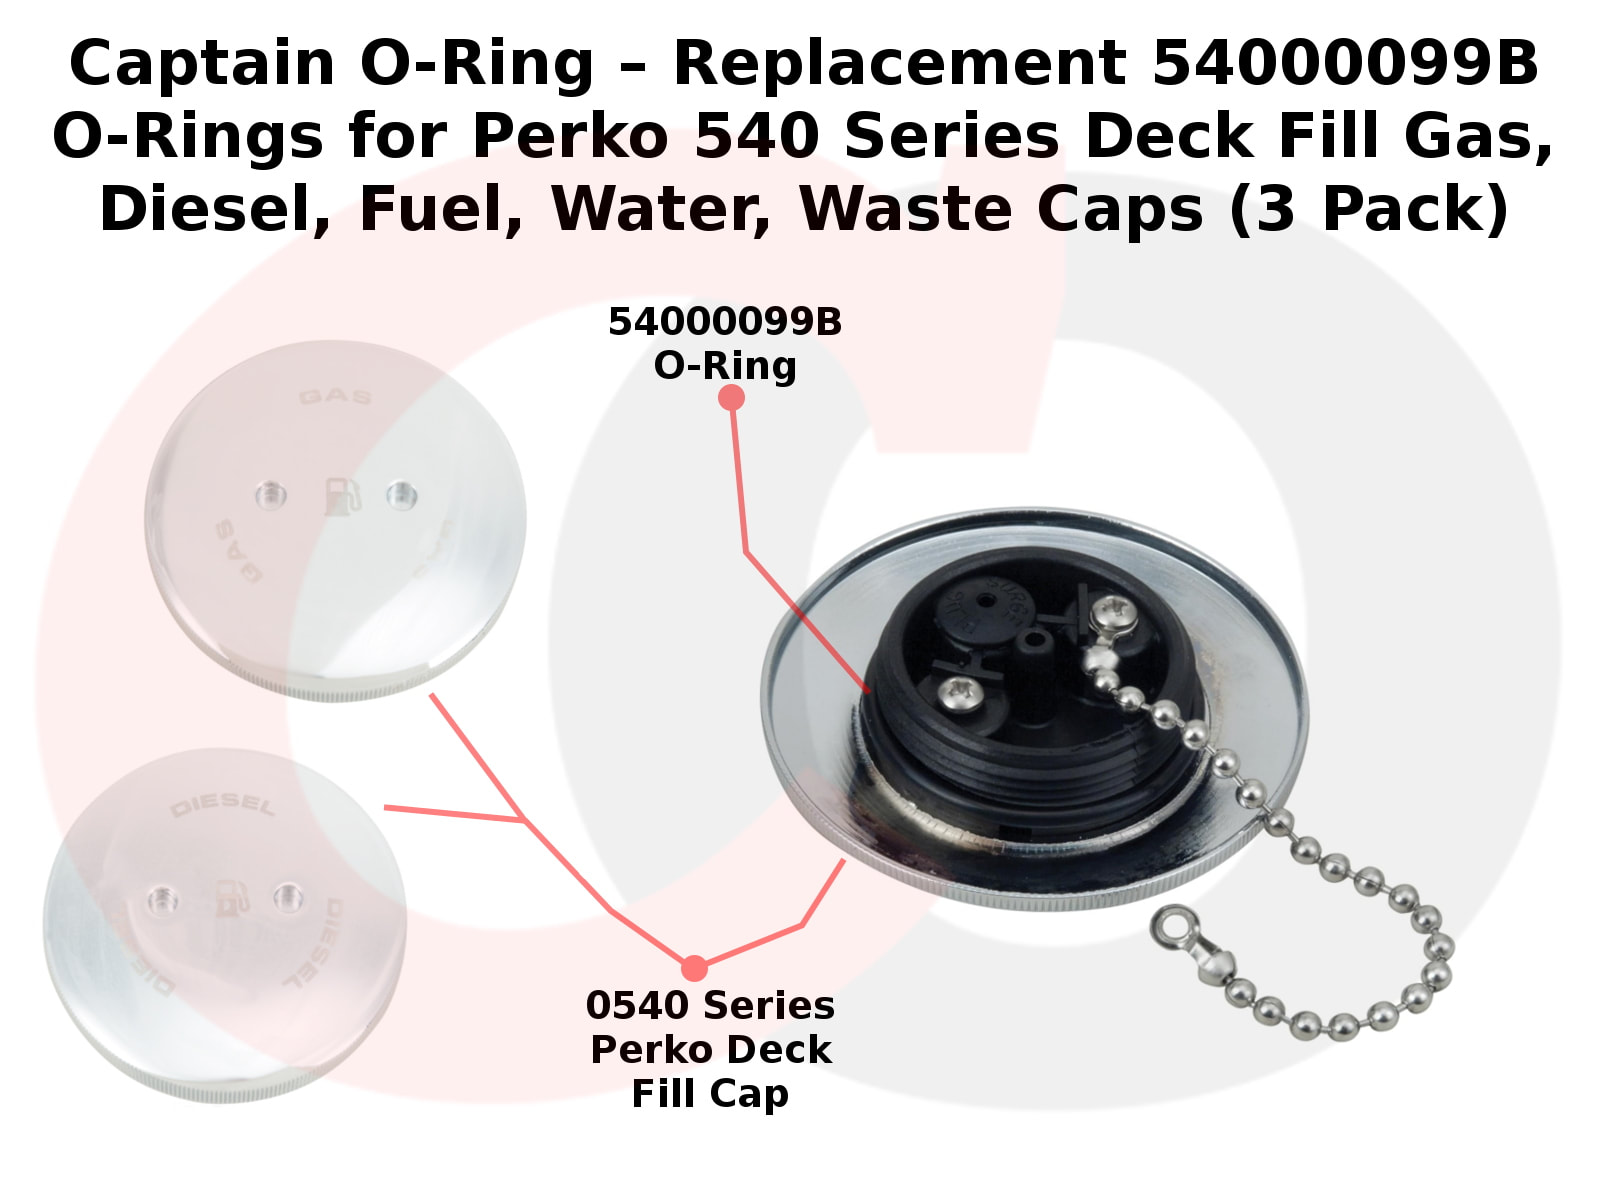 Captain O-Ring – Replacement 54000099B O-Rings for Perko 540 Series Deck  Fill Caps for Gas, Diesel, Fuel, Water, Waste (3 Pack)